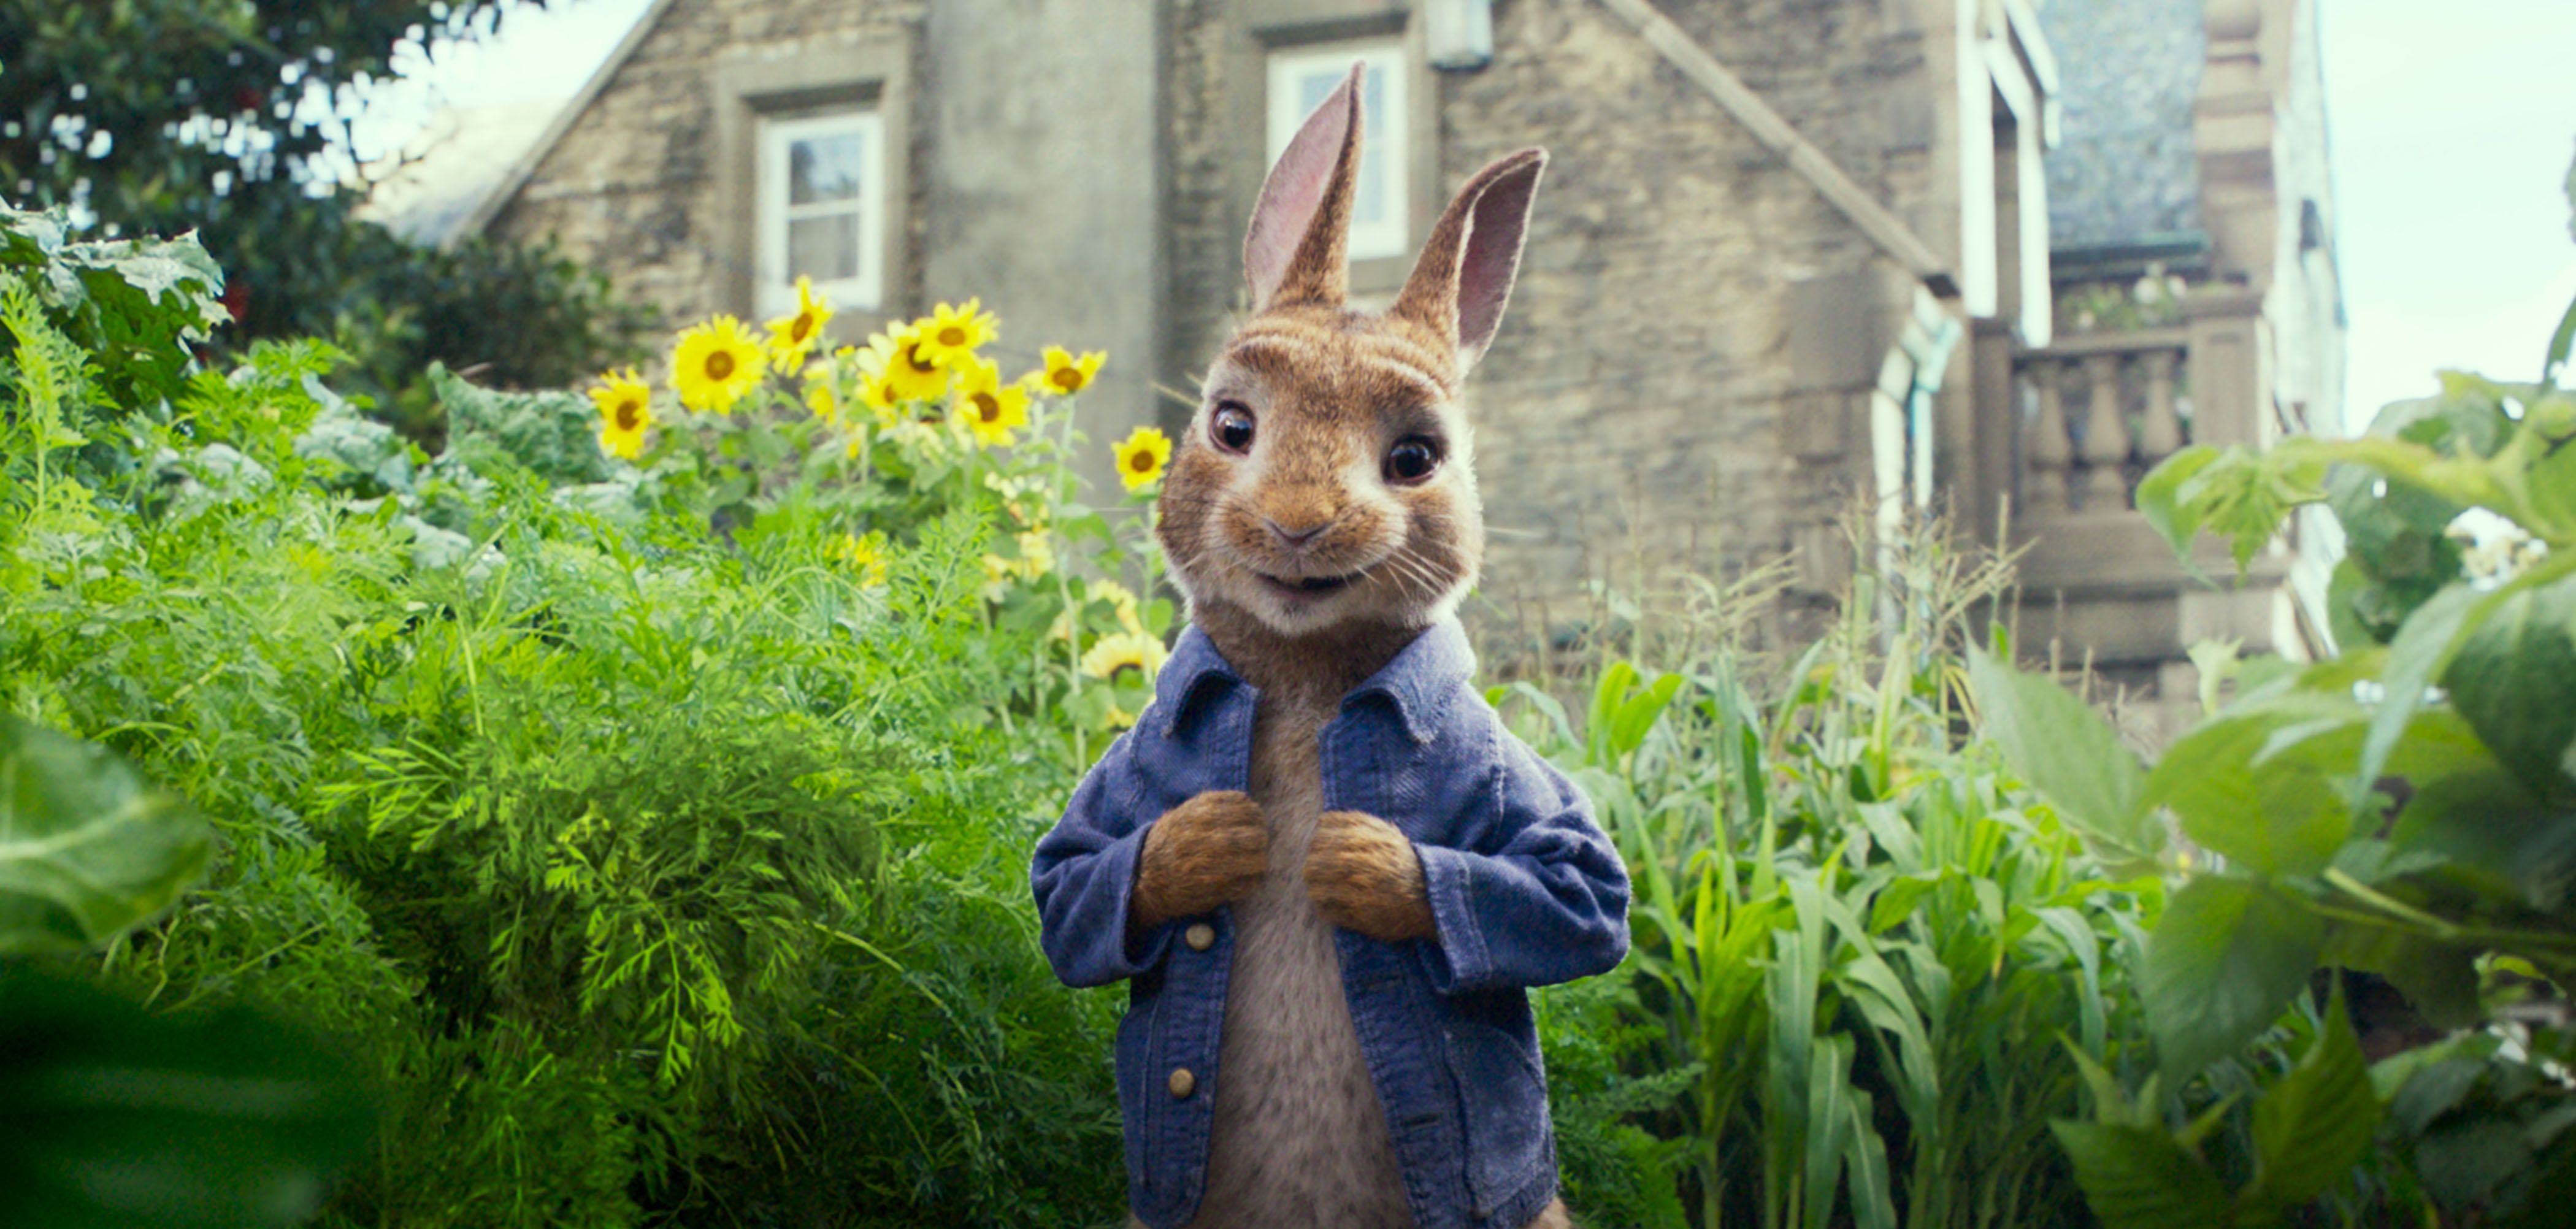 Peter Rabbit Review Being Cool Rather Than Charming.